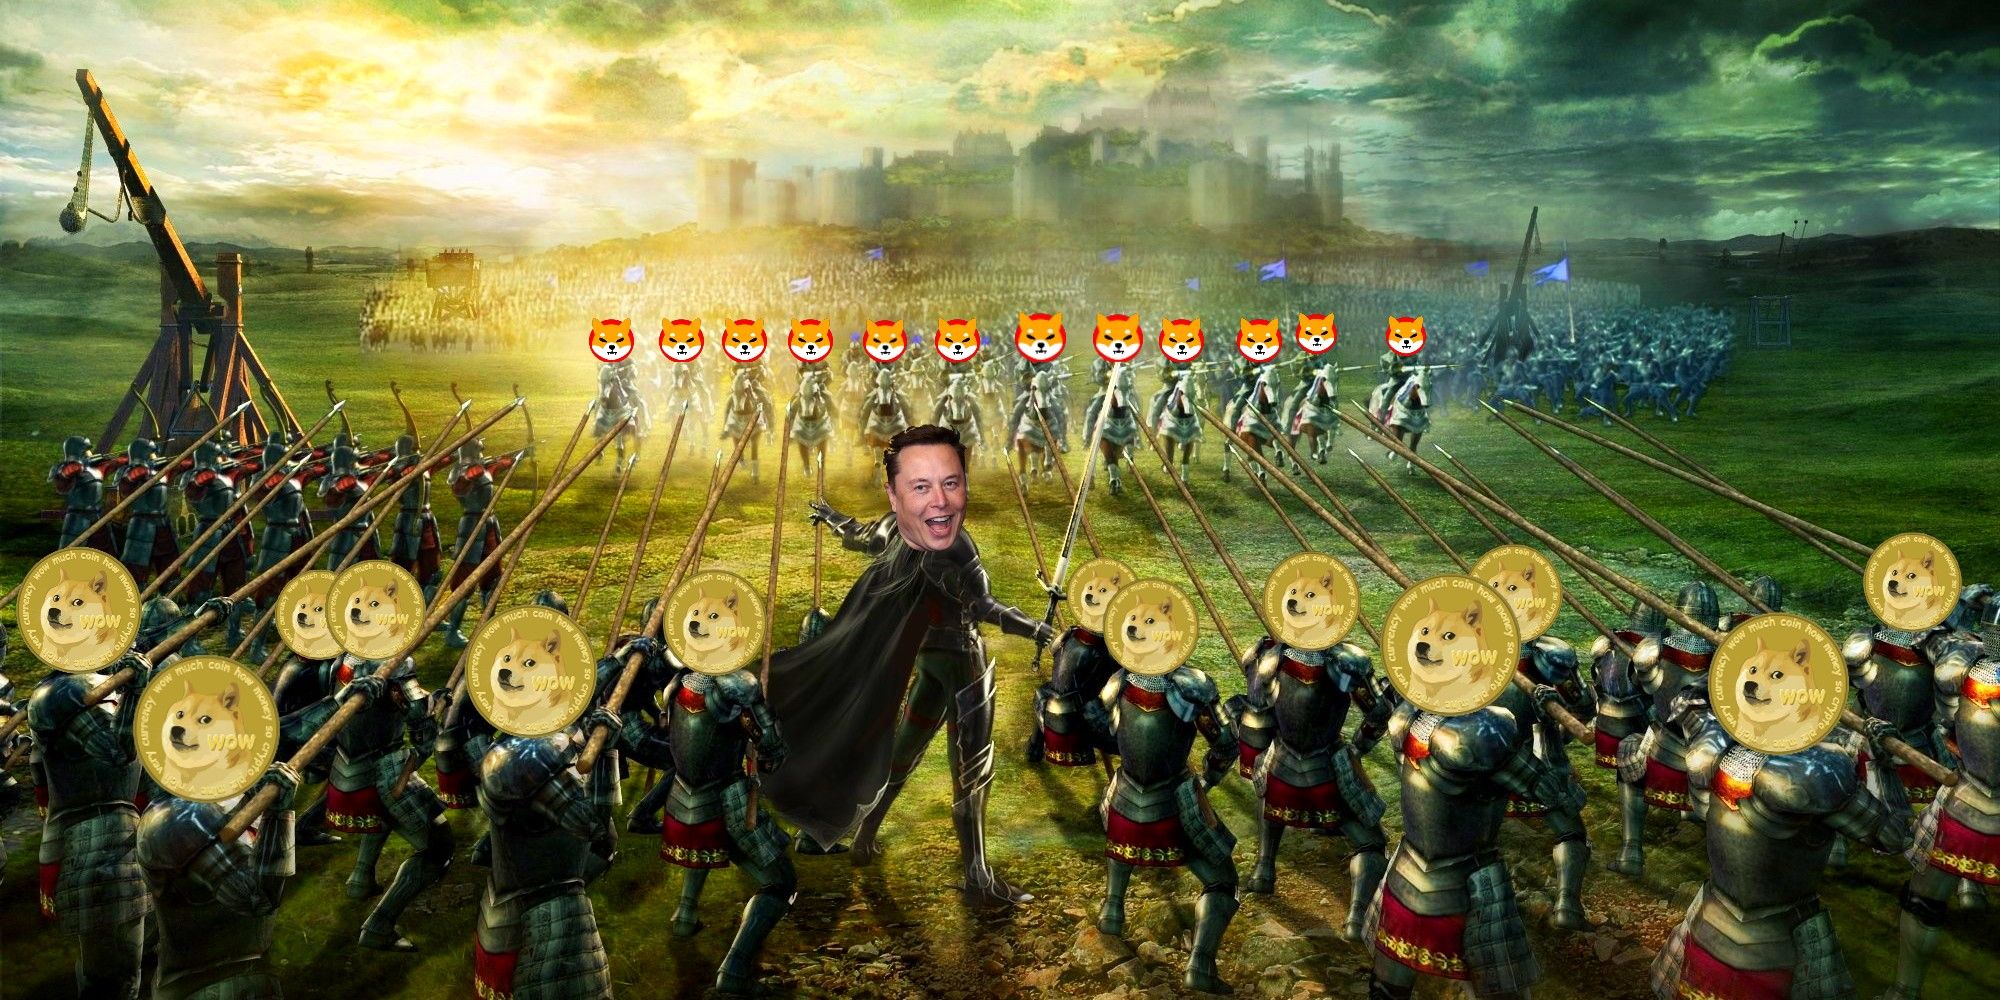 Fantasy art of two medieval armies clashing, one side with Shiba Inu logos on heads, other side with Dogecoin logos on heads with Elon Musk head on leader